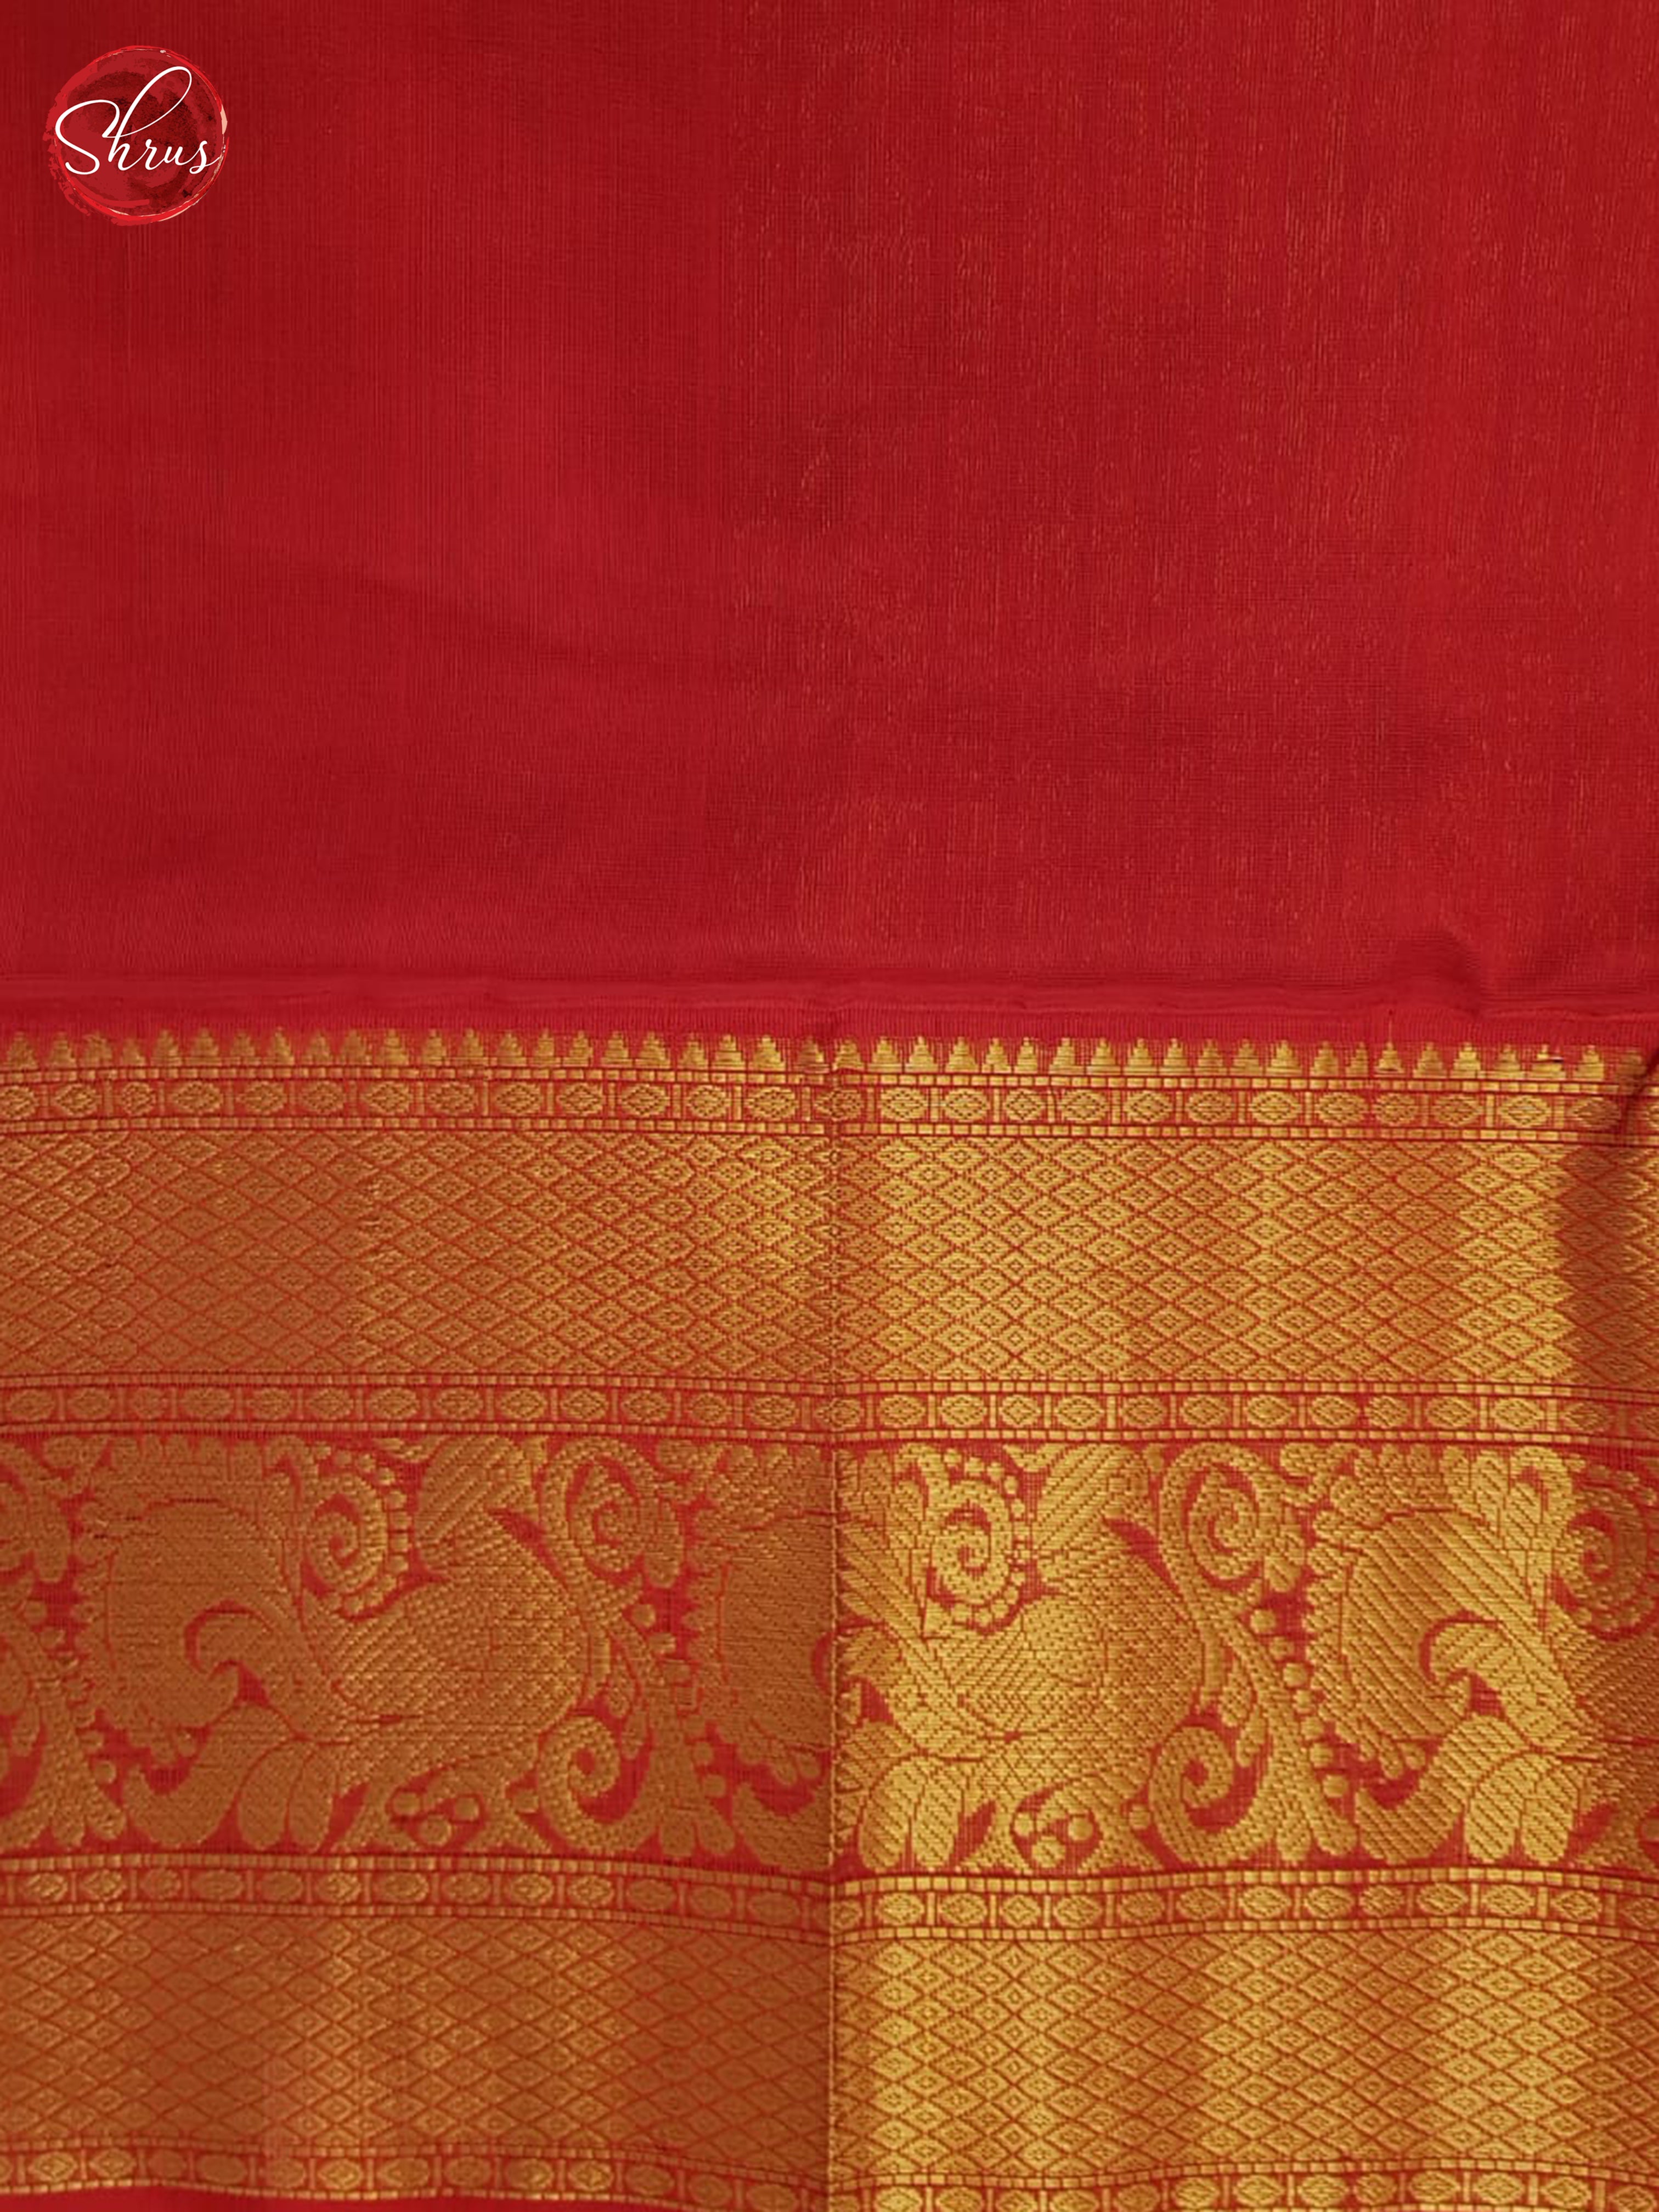 Beige And Red-Silk Cotton Saree - Shop on ShrusEternity.com